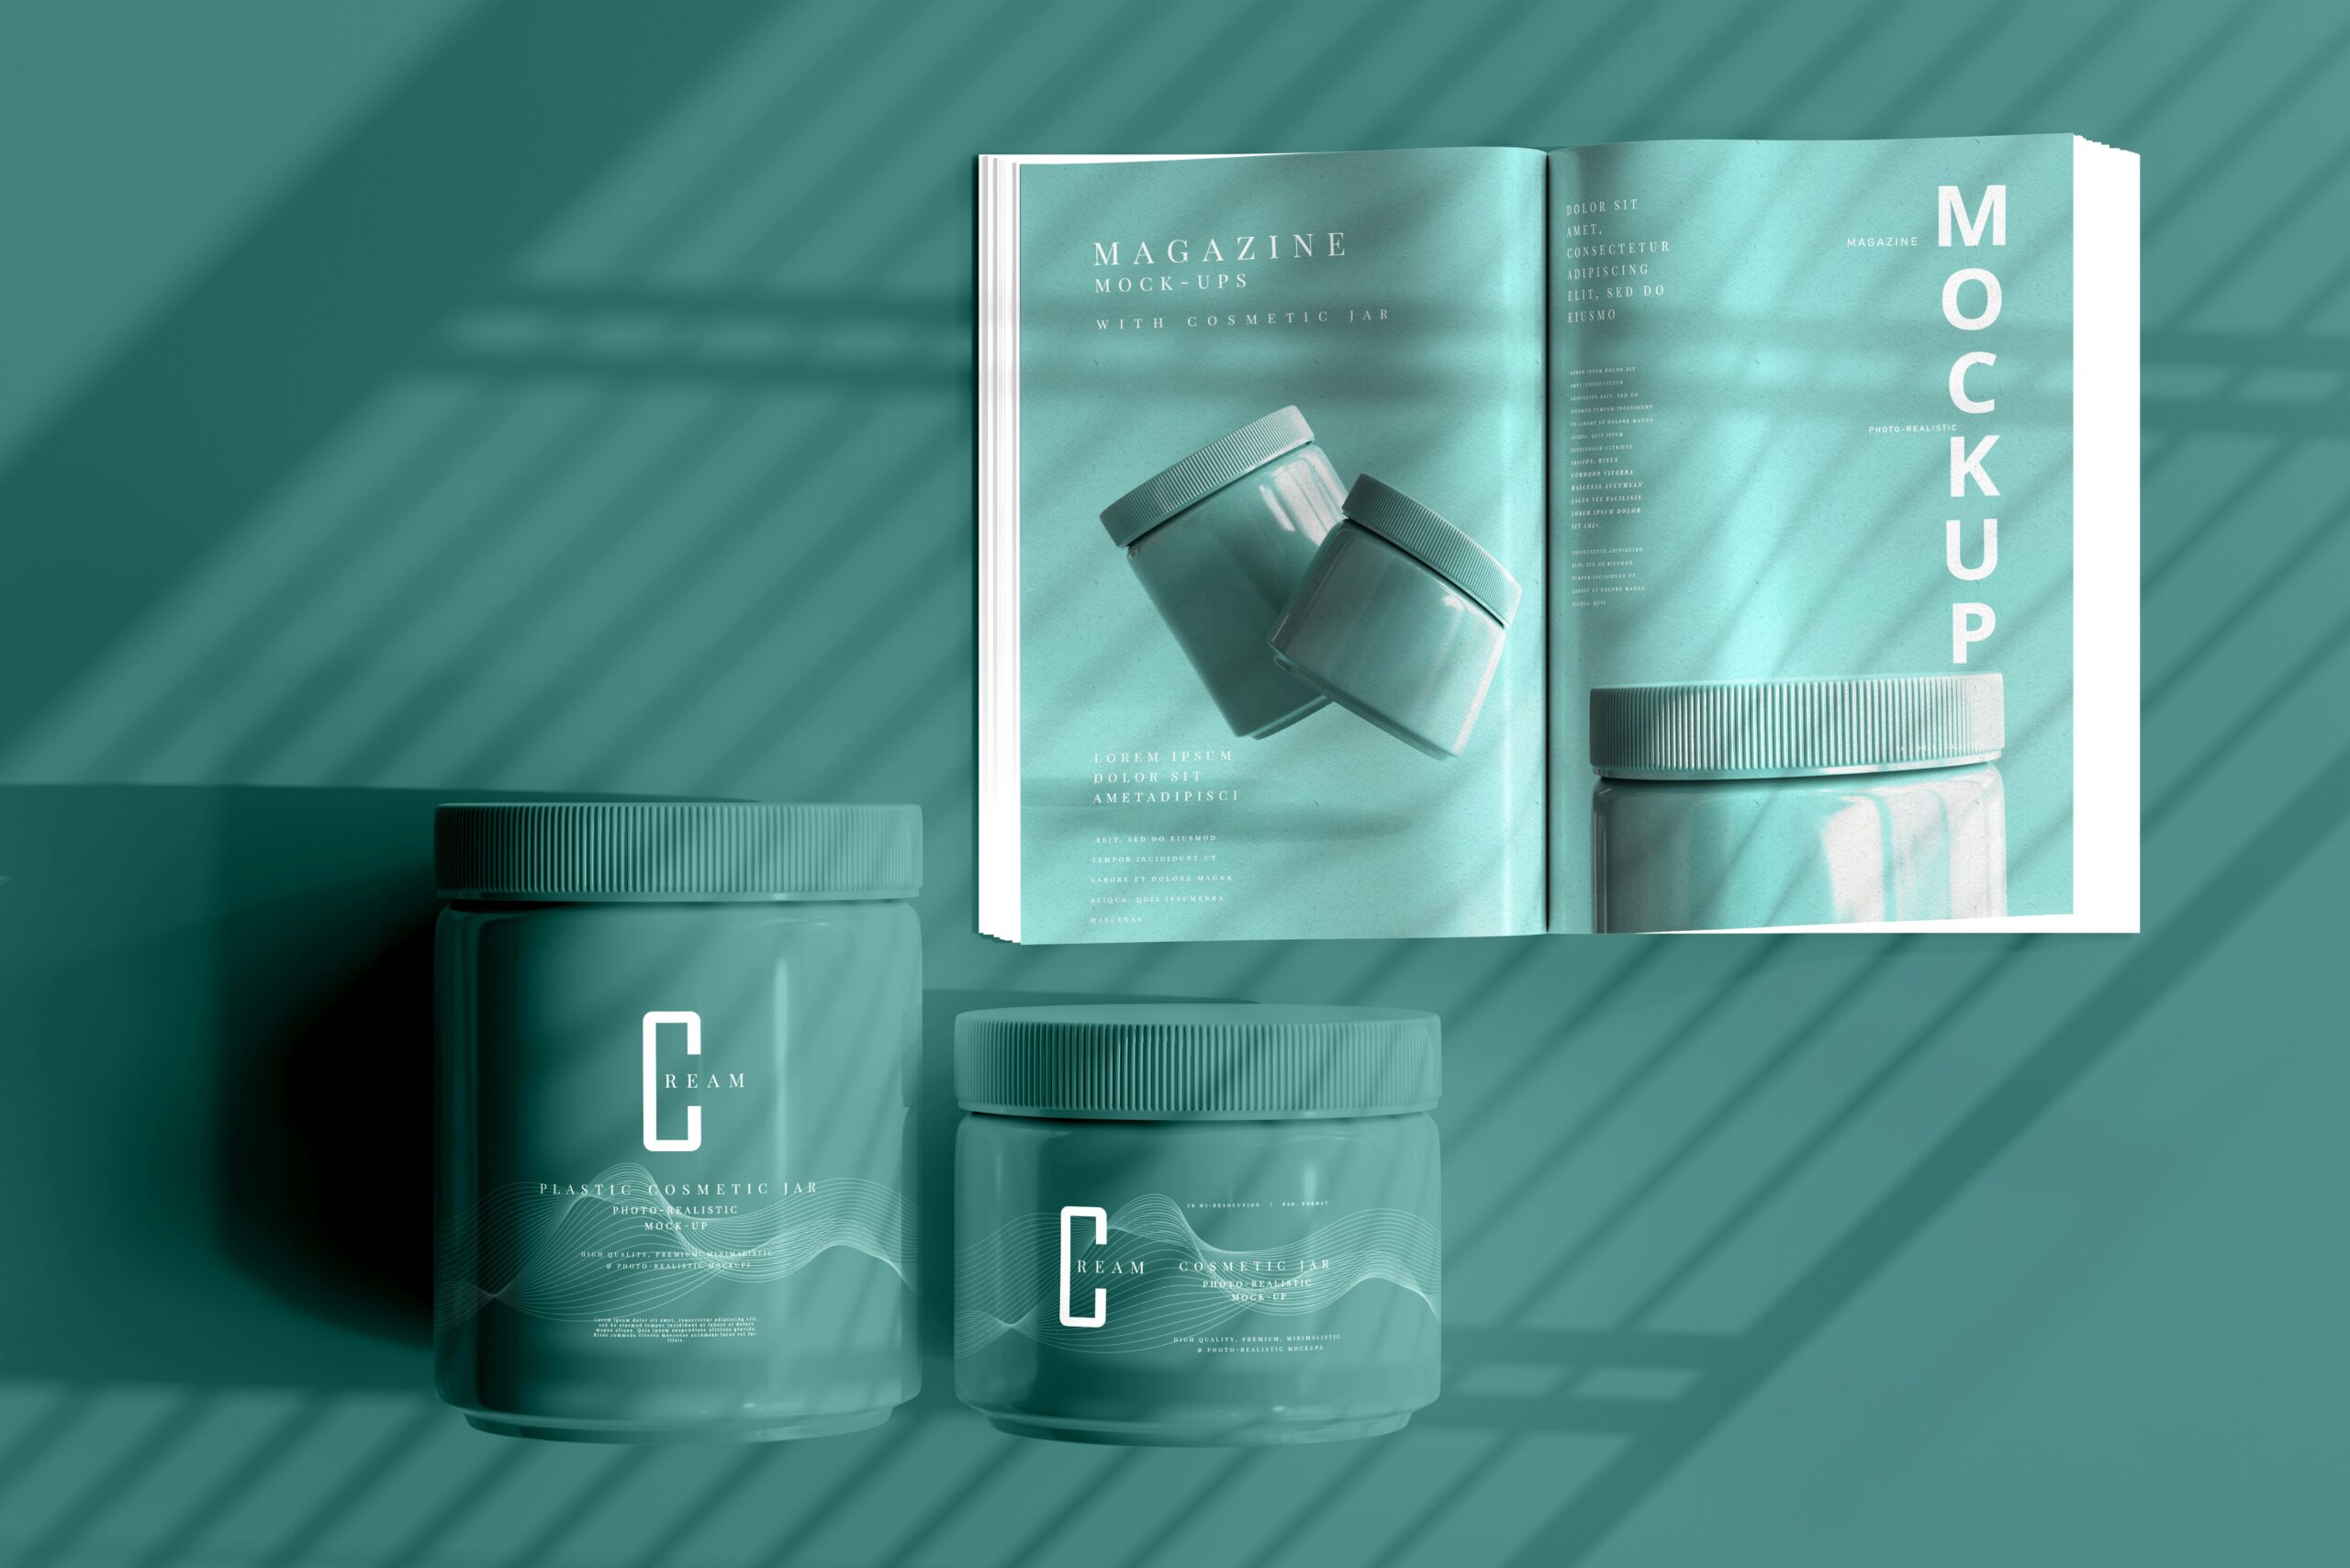 Teal branding with a guide book and packaging